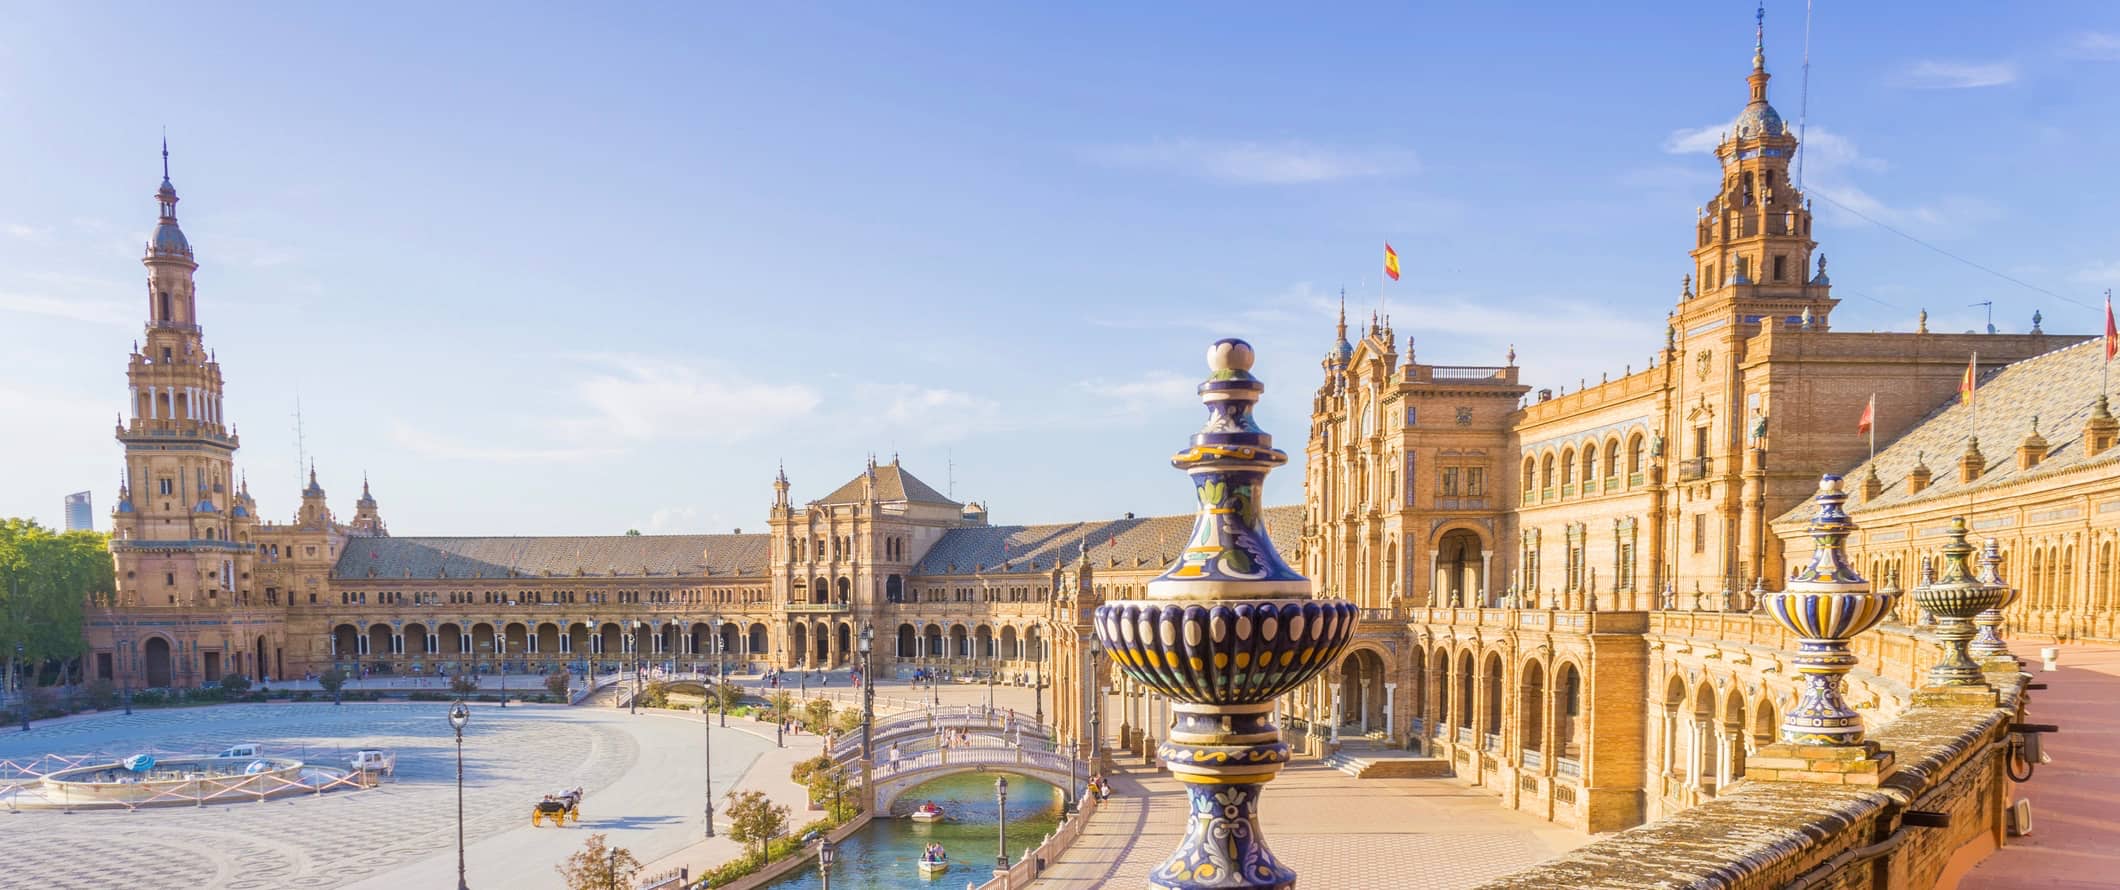 The massive historic palace in Seville, Spain with its intricate arcitecture